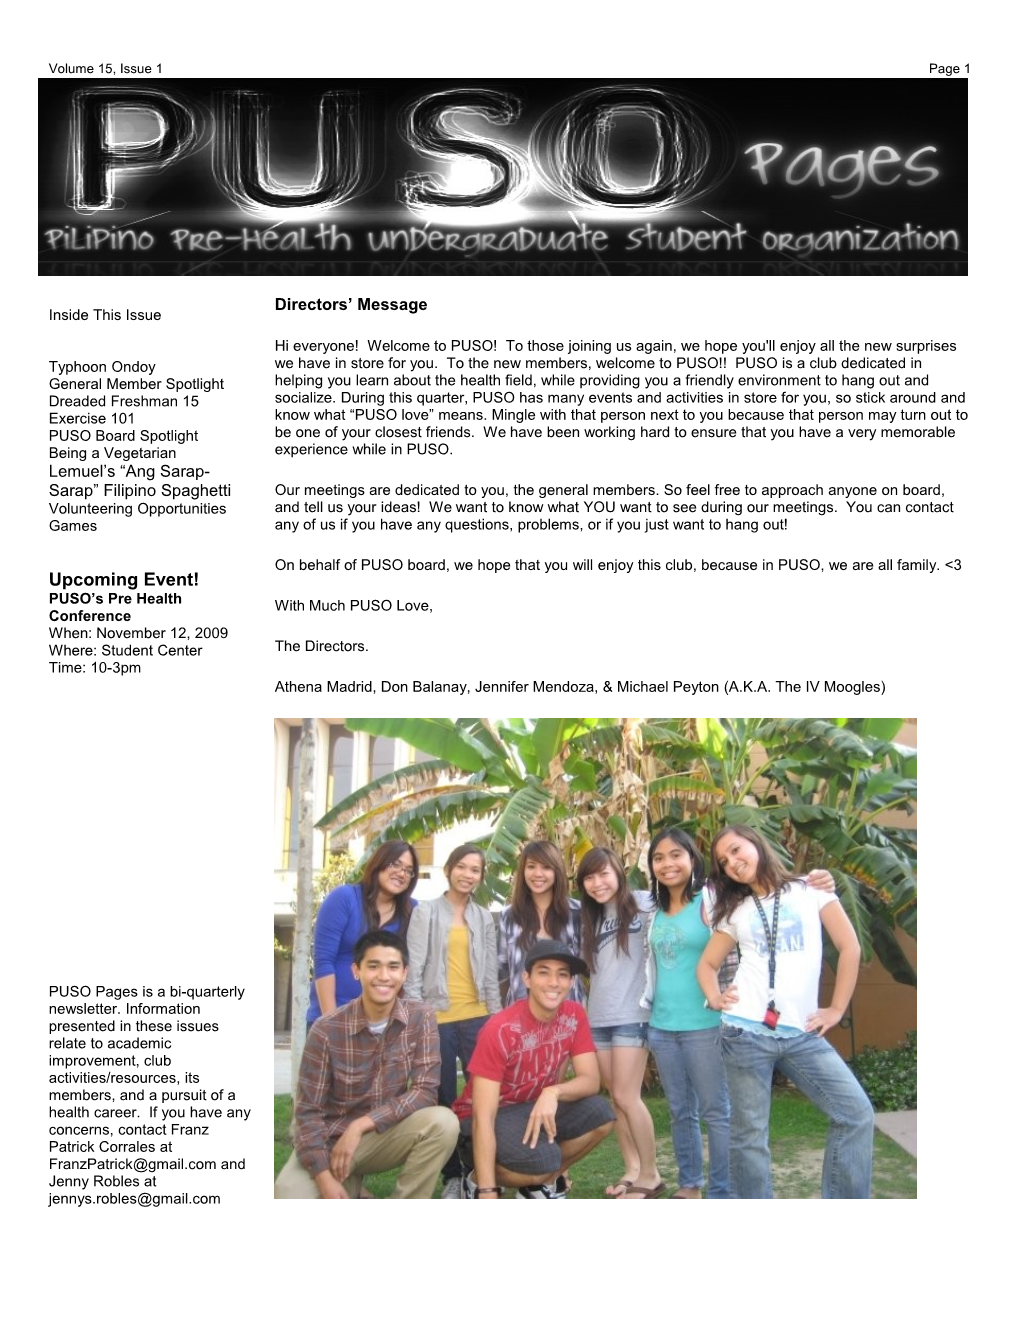 PUSO Pages, Vol. 15, Issue 1